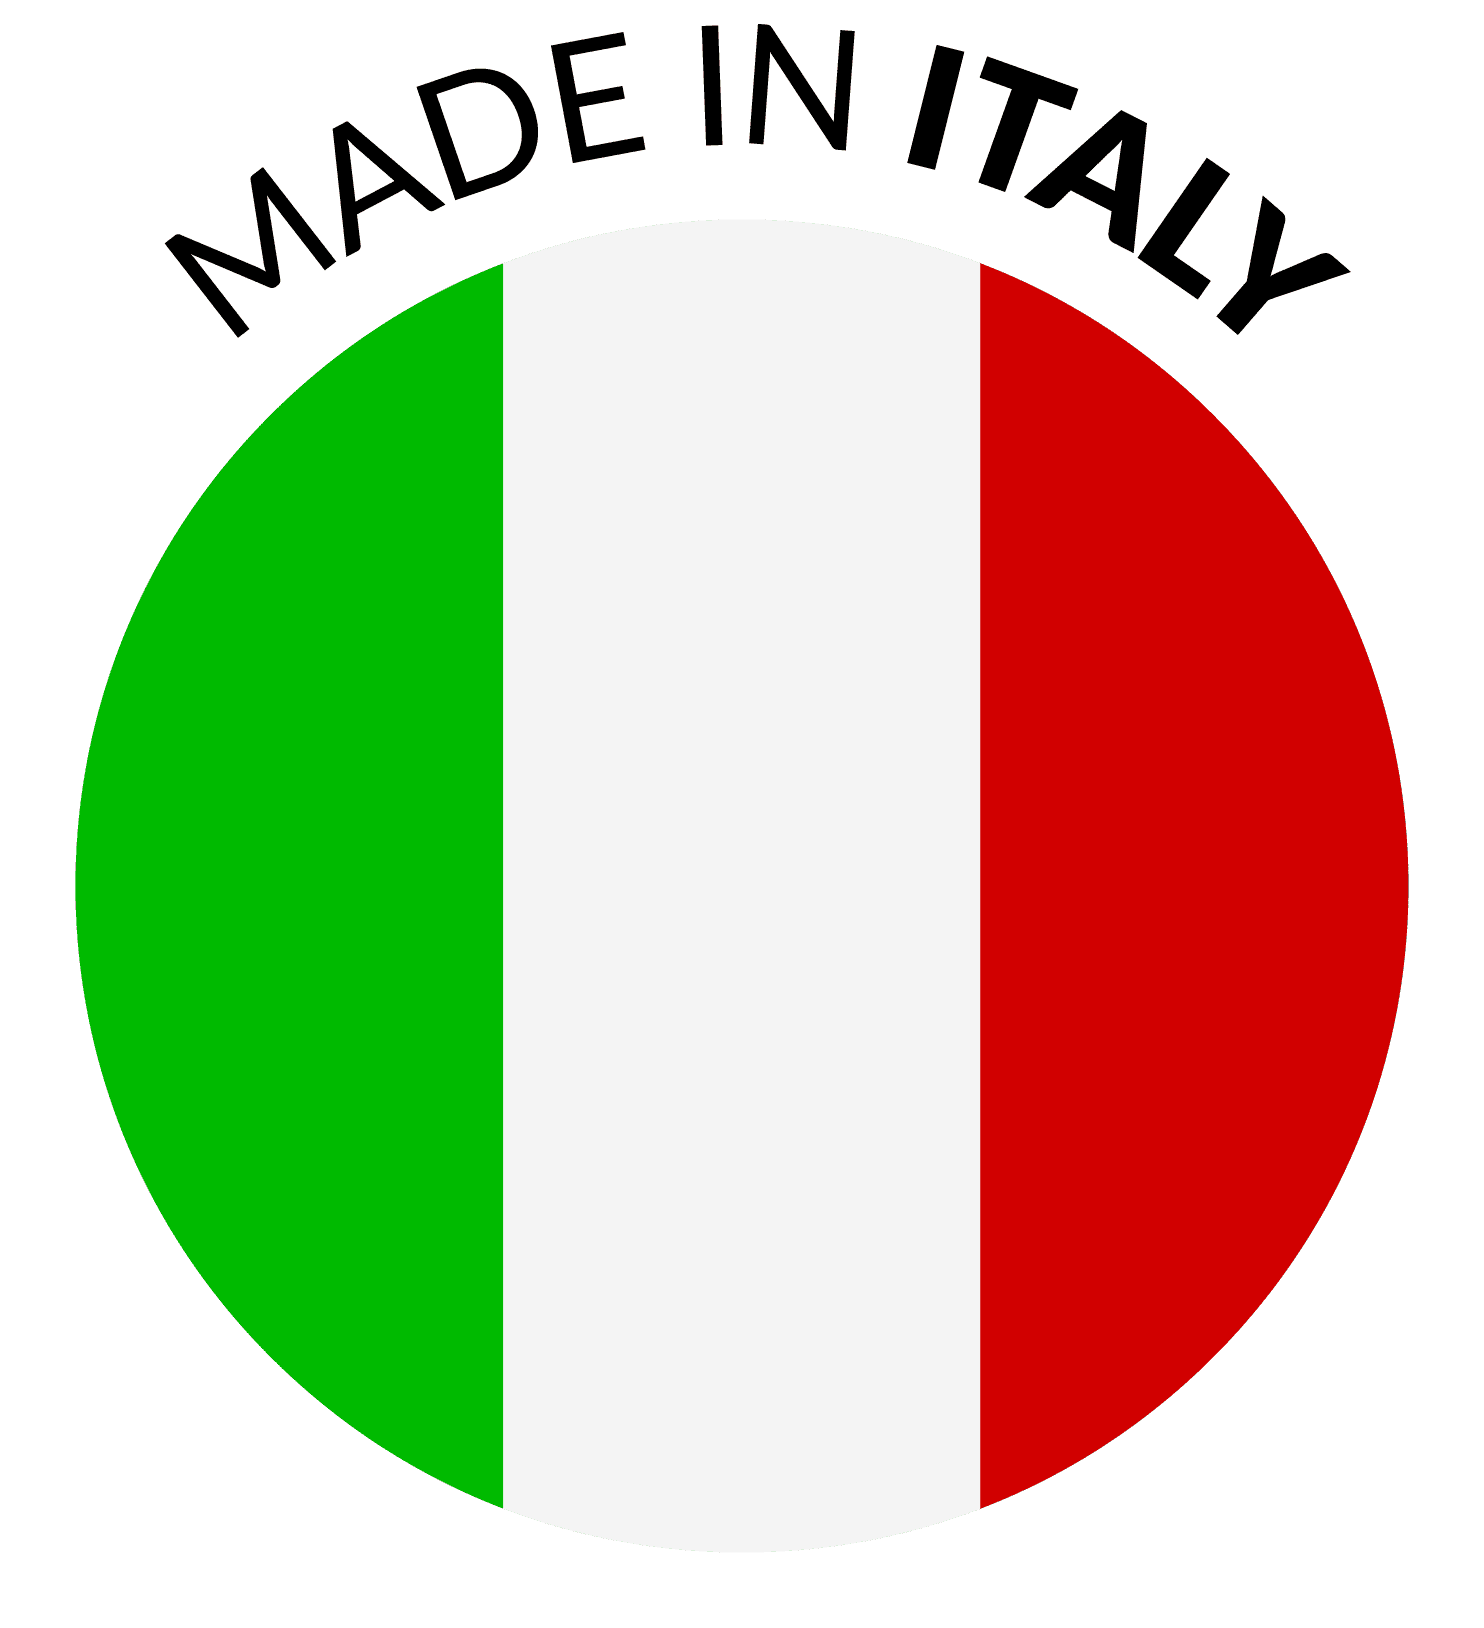 made in italy badge